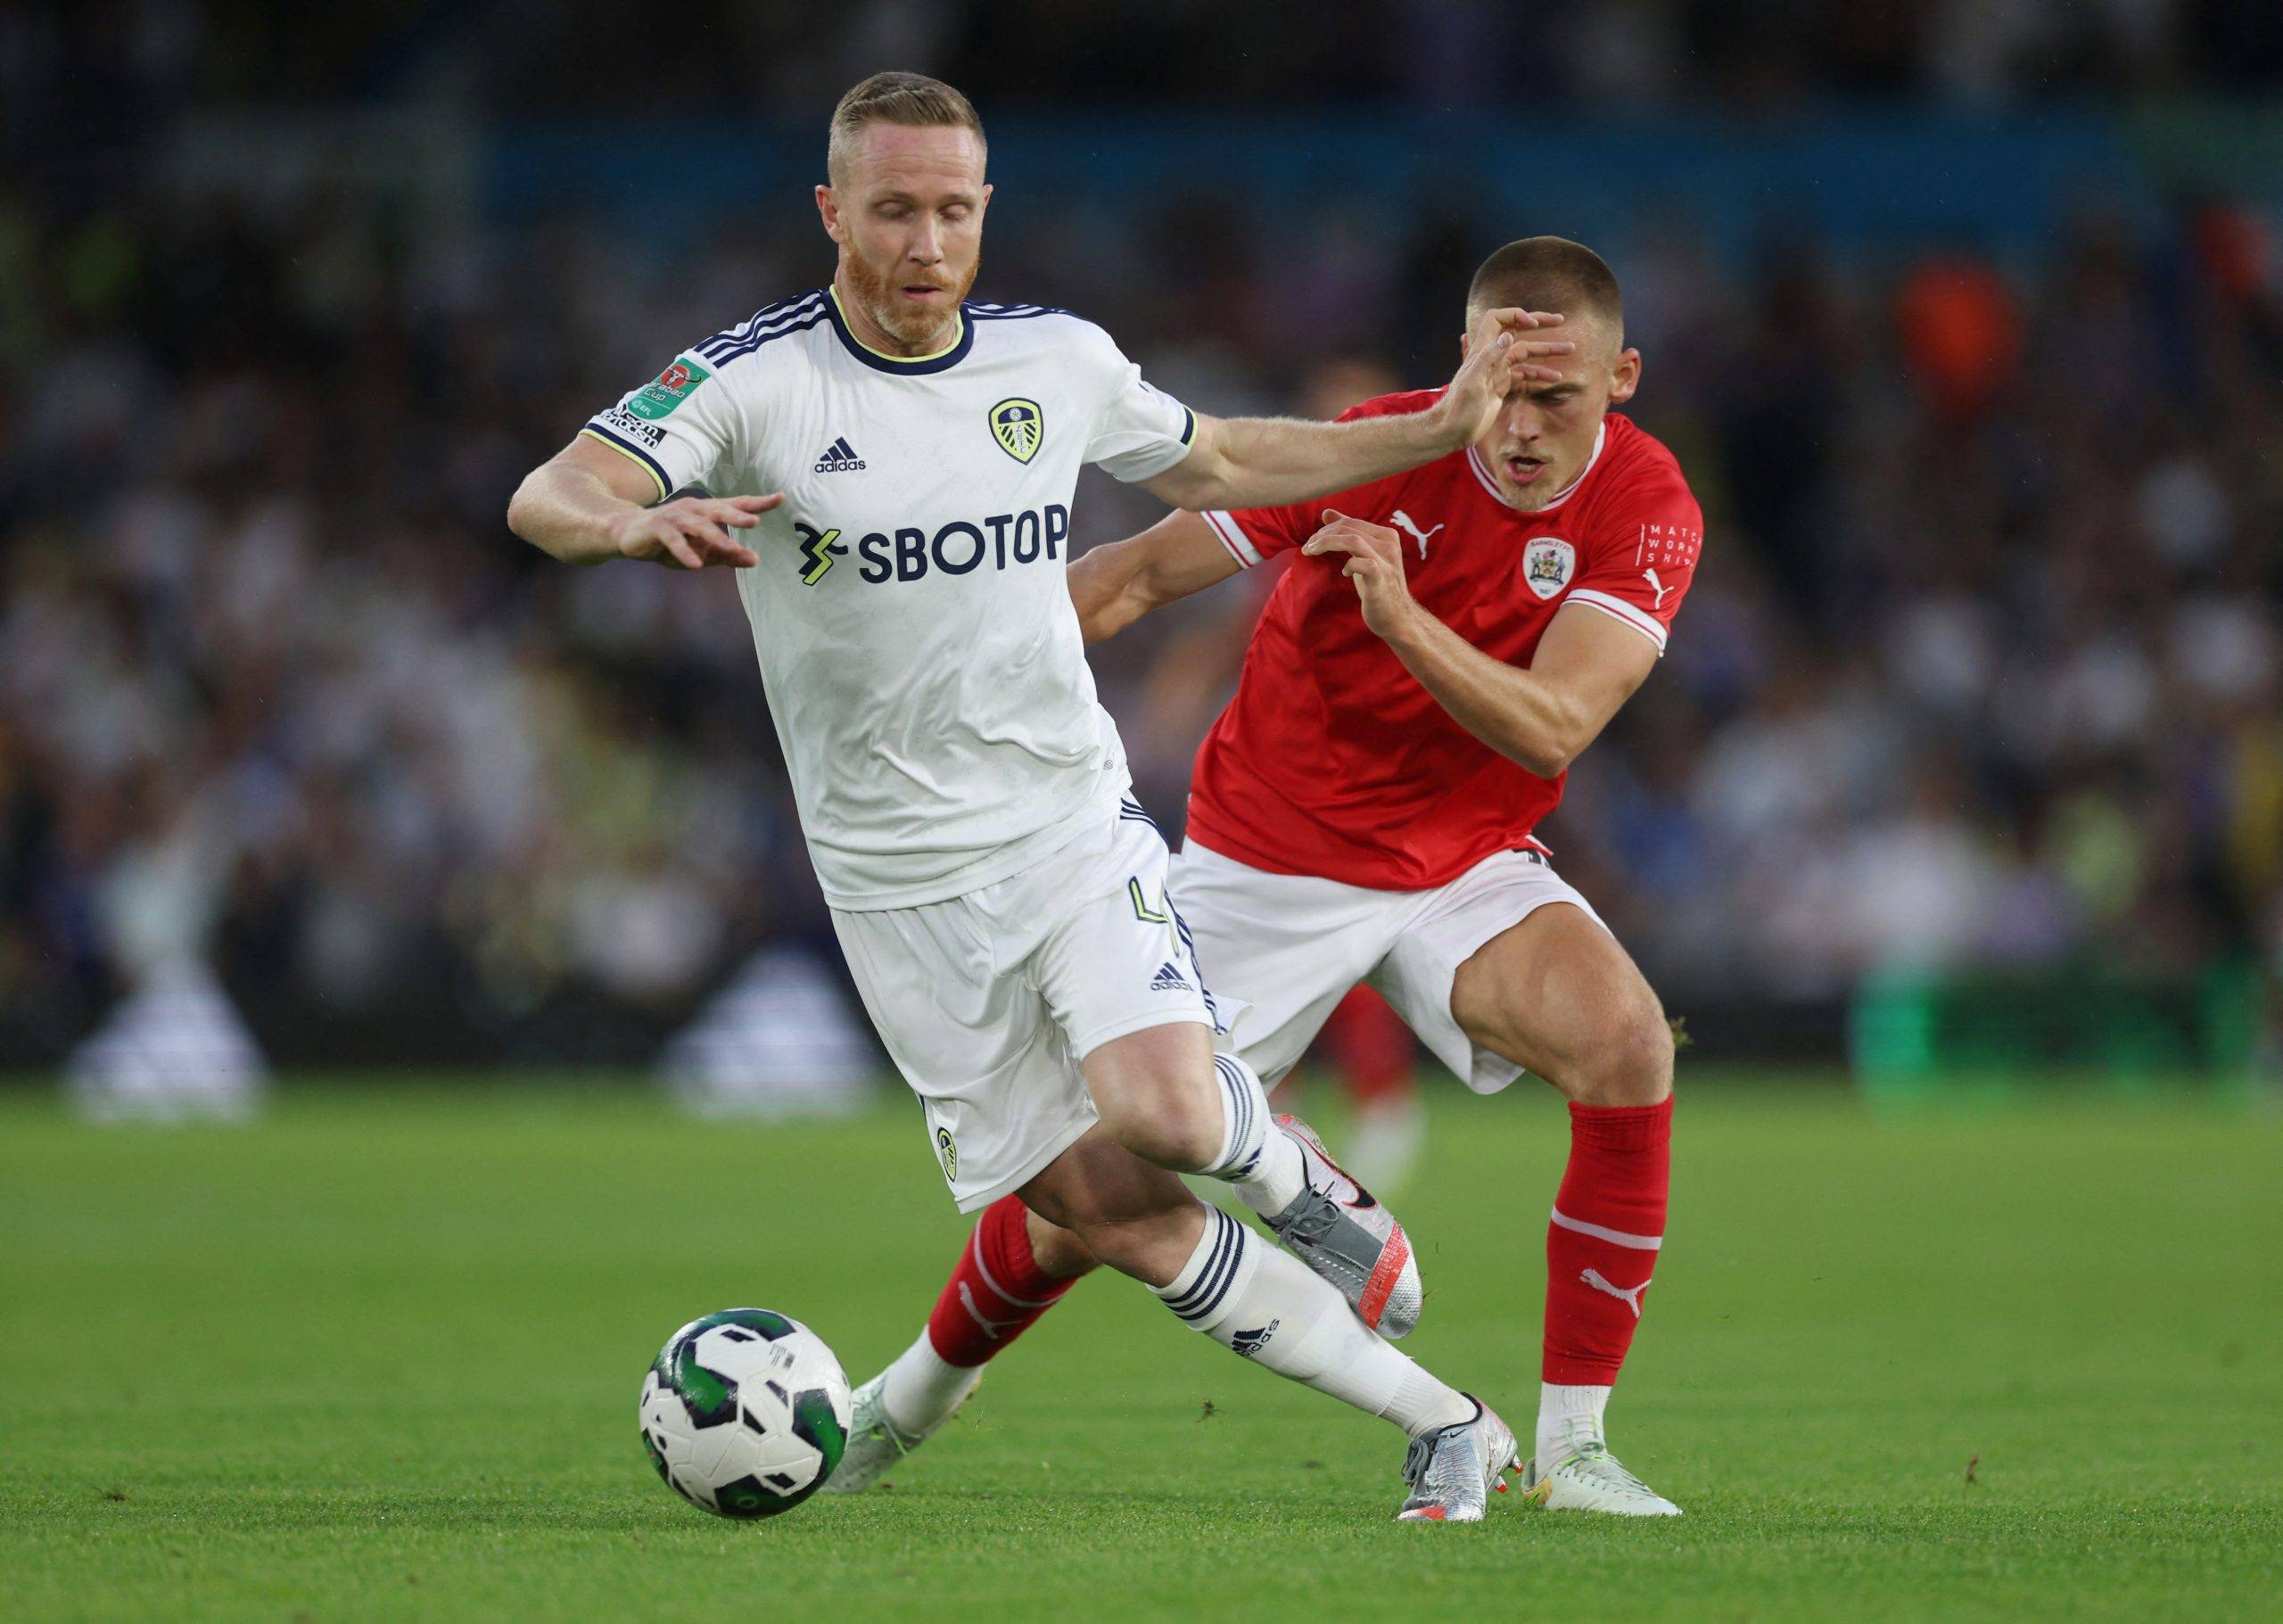 Leeds: Adam Forshaw will be allowed to leave in January - Follow up